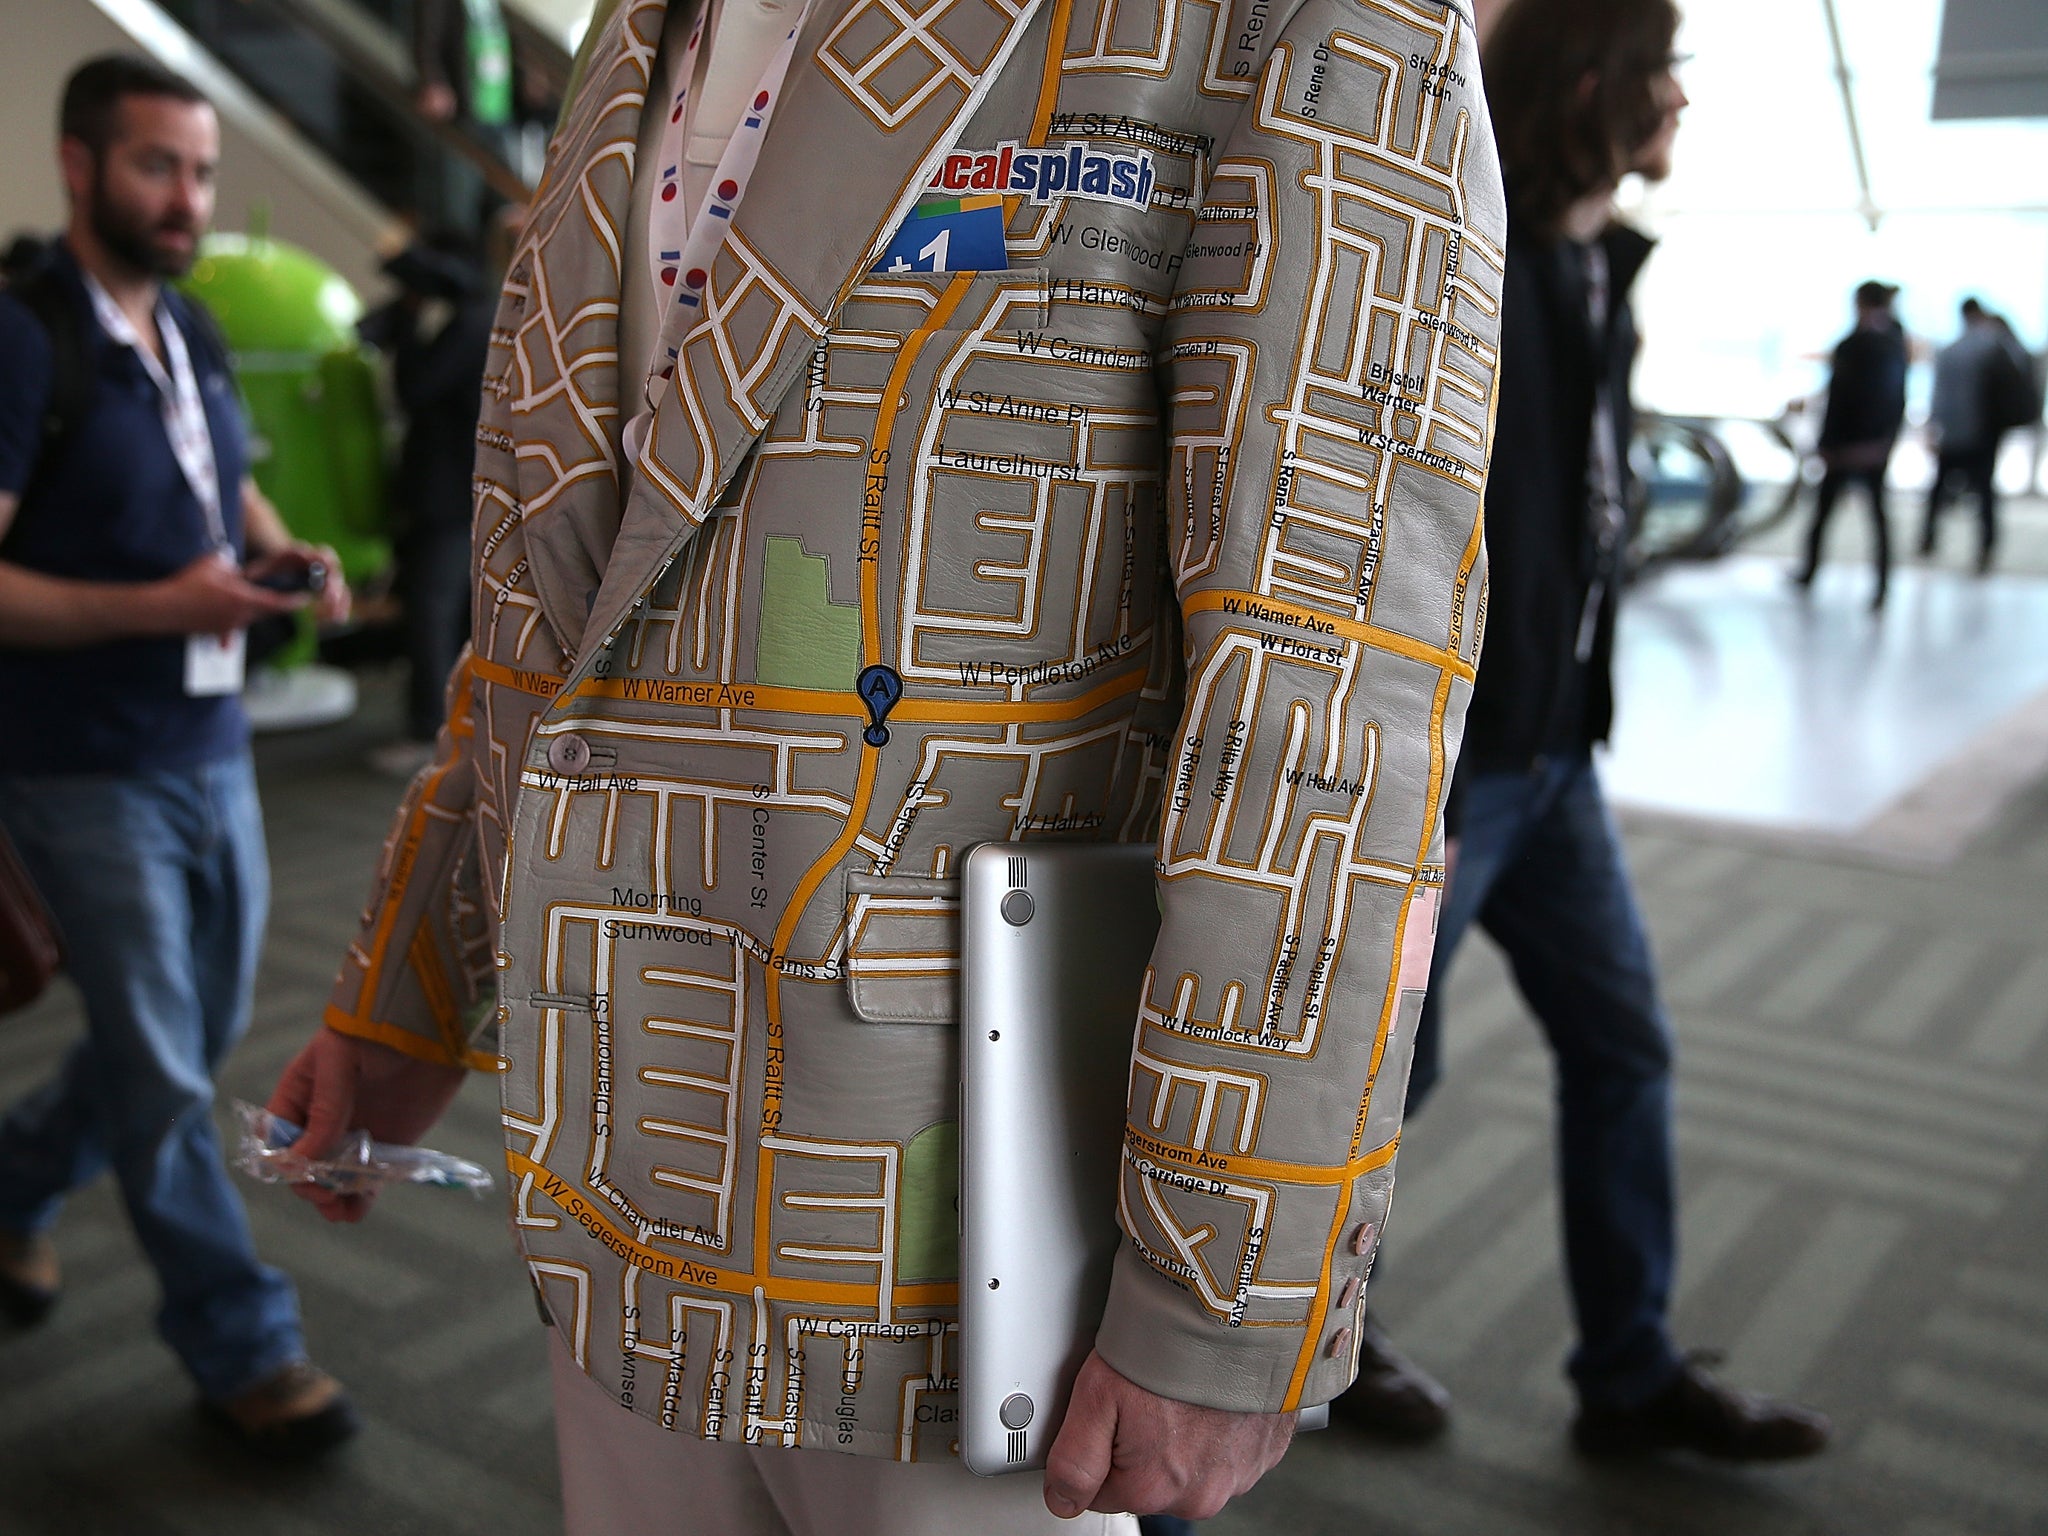 An attendee wears a custom made Google maps leather coat during the Google I/O developers conference at the Moscone Center on May 15, 2013 in San Francisco, California